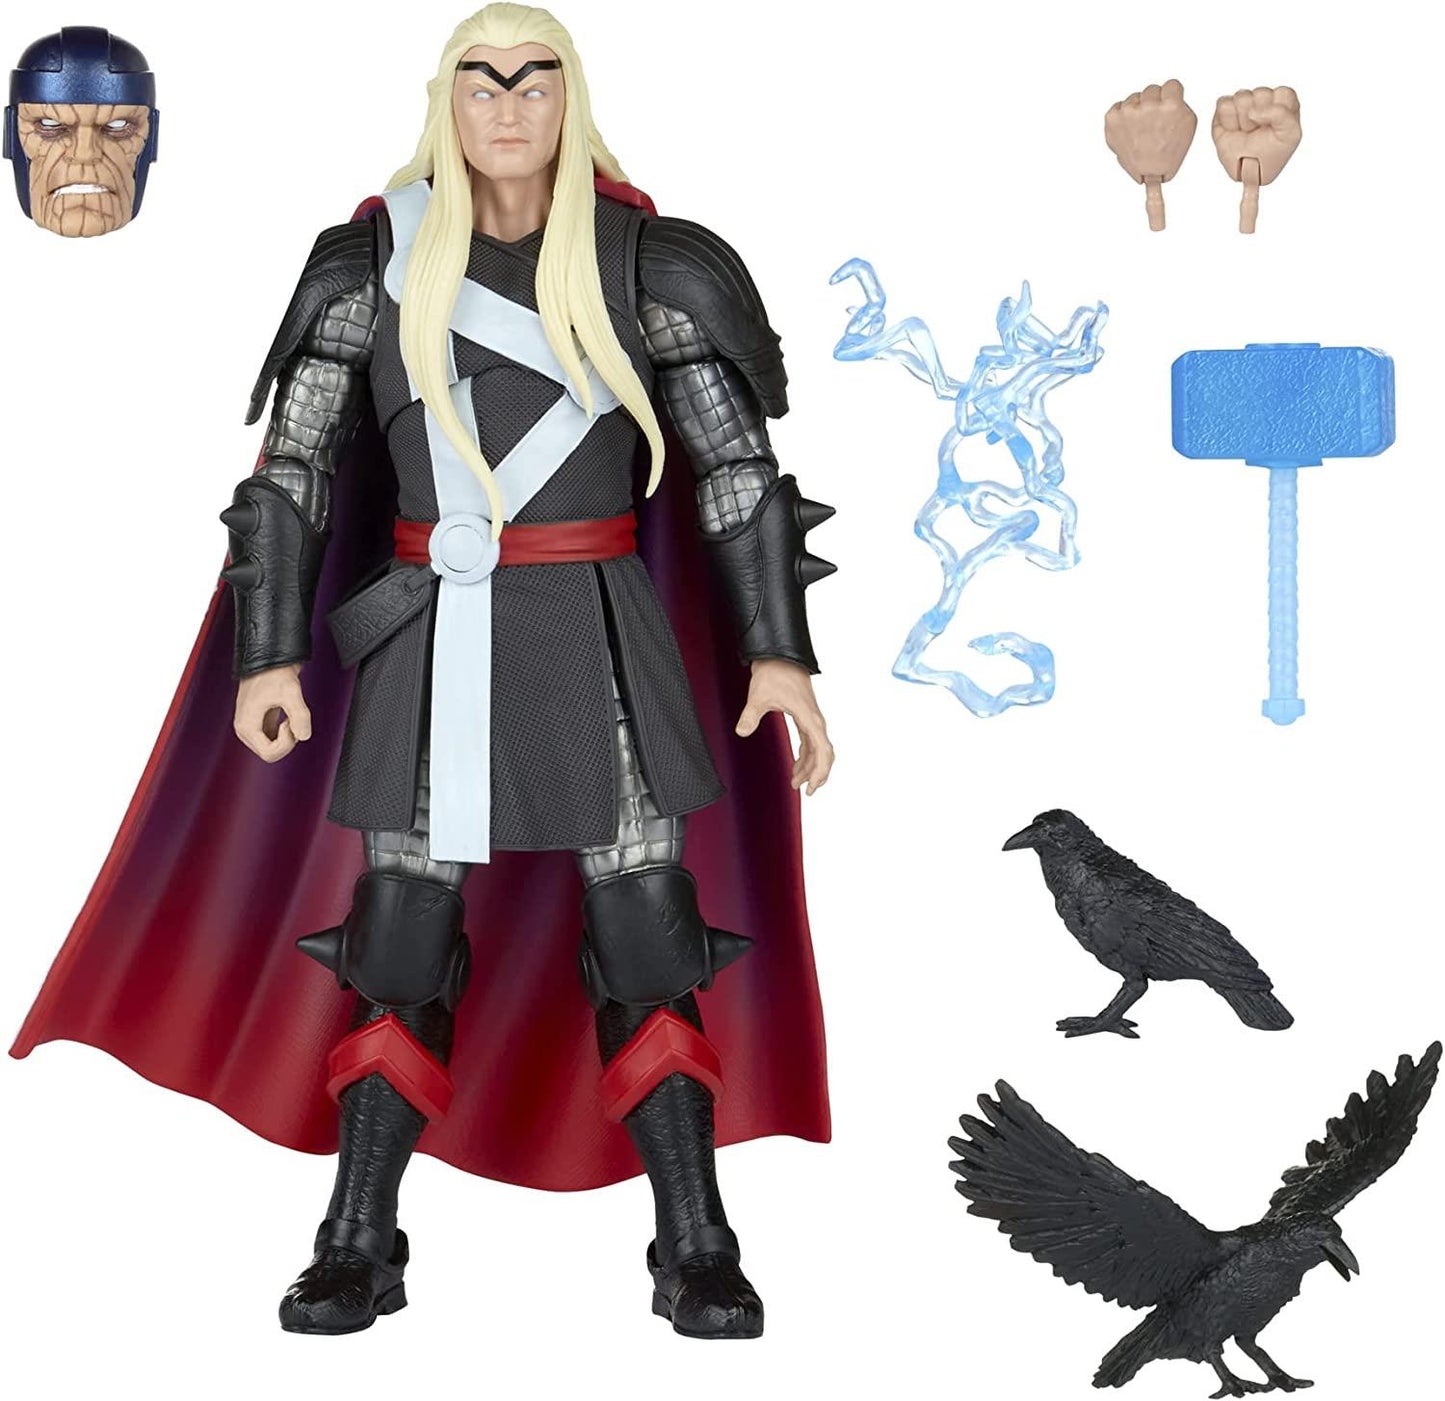 THOR HERALD OF GALACTUS Action Figure Build-A-Figure Marvel Toys Legends Series F4793